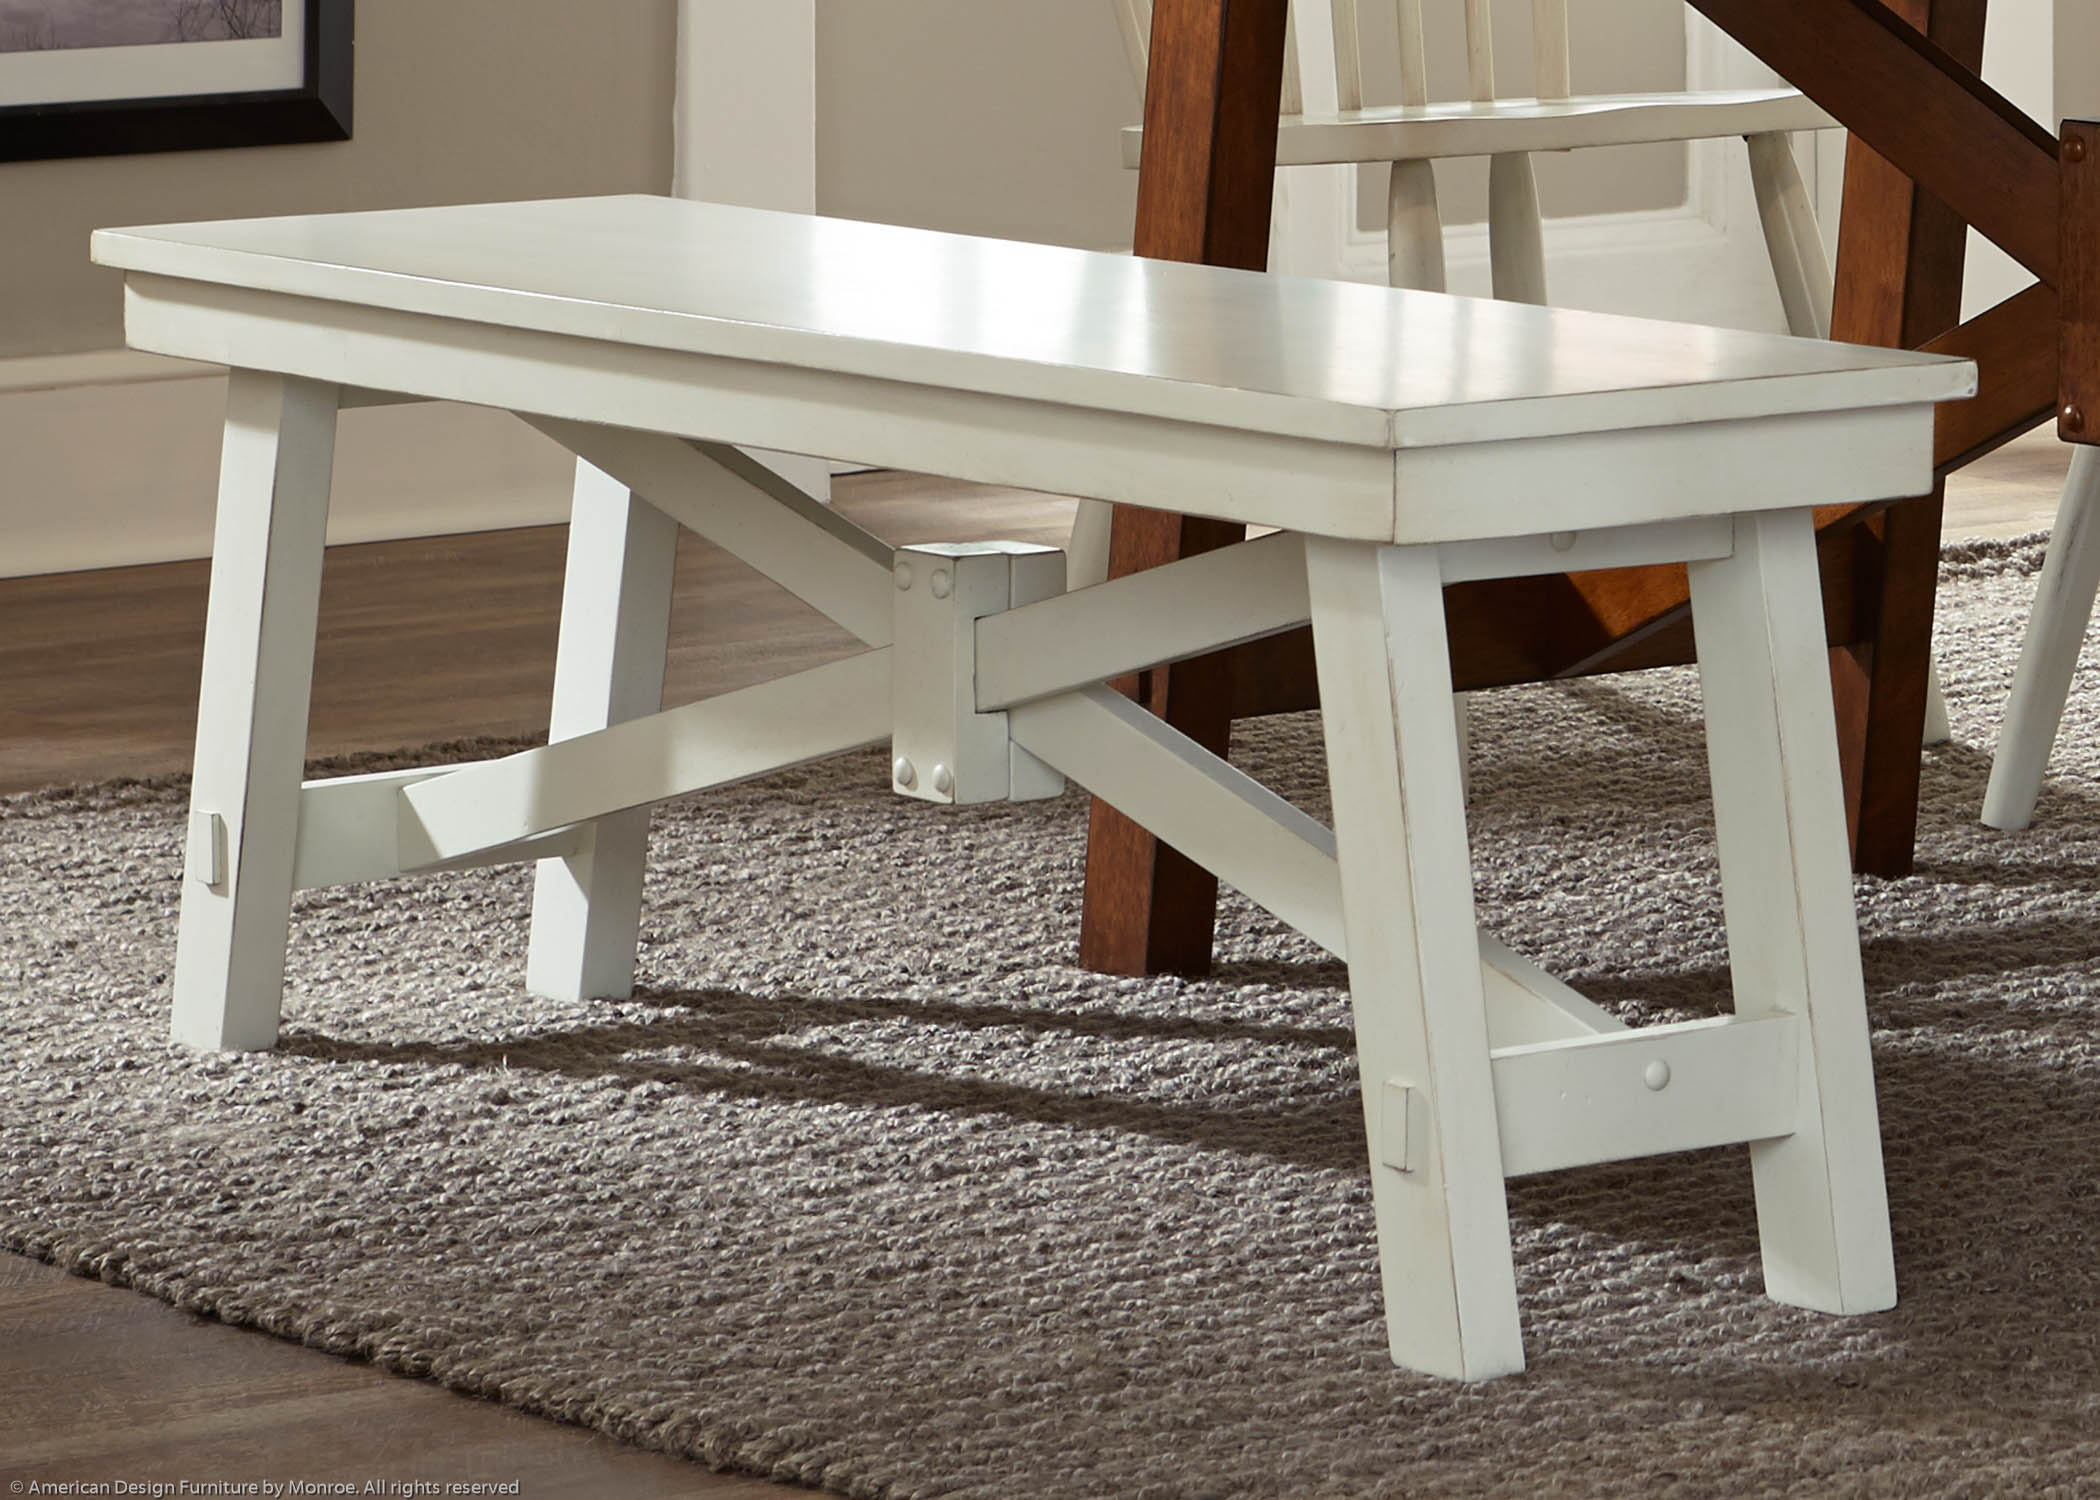 Nantucket Casual Bench Pic 1 (Heading Bench (White)